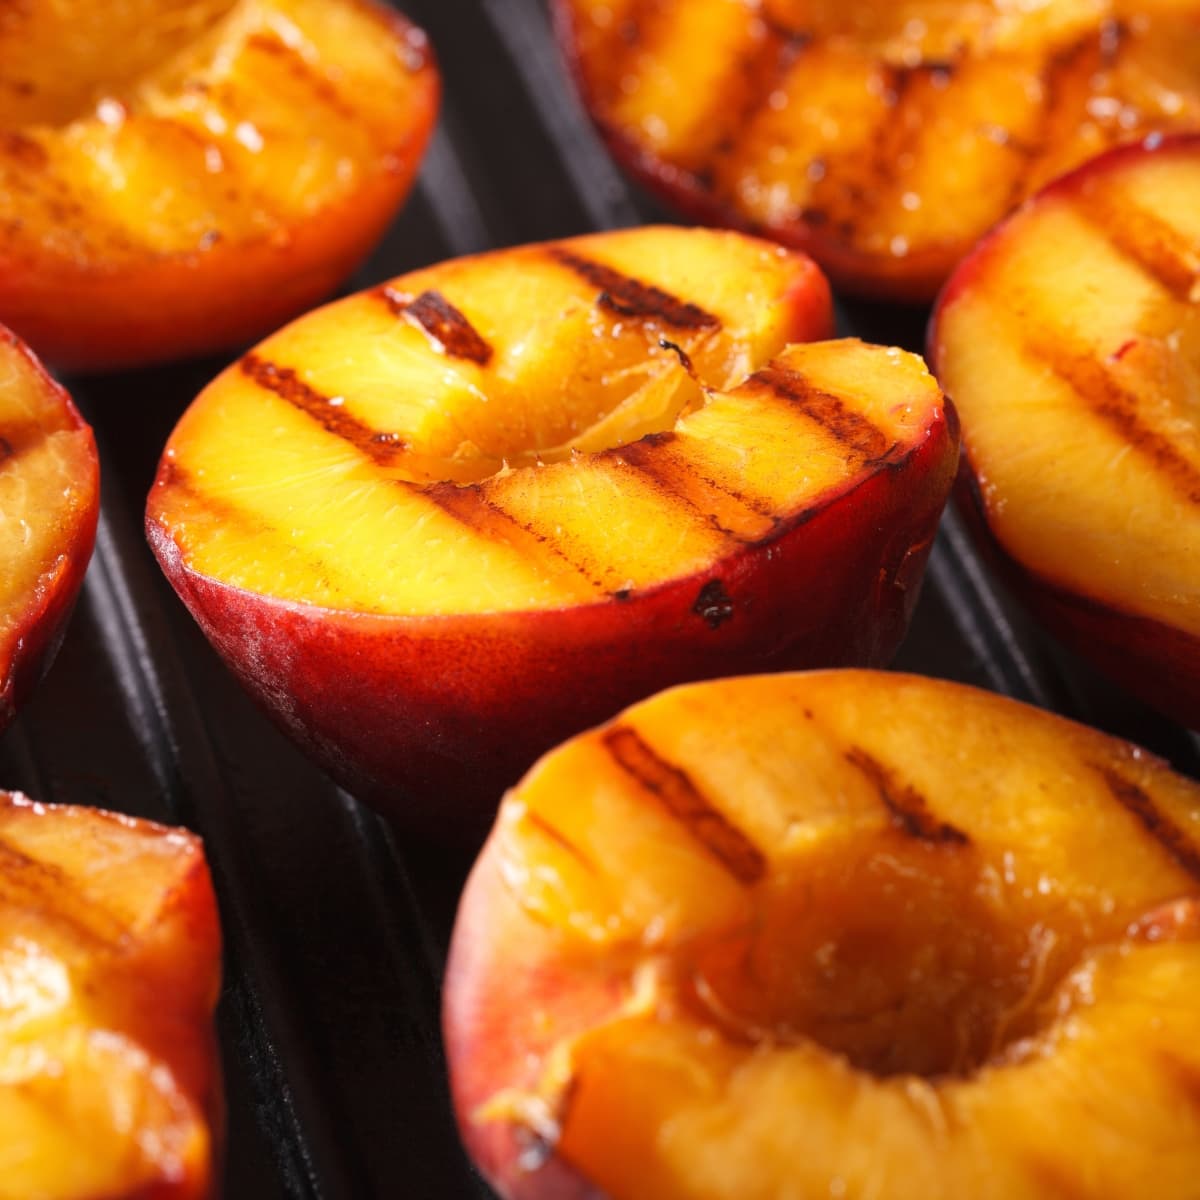 Ripe peaches cut in halves on a grilling pan.